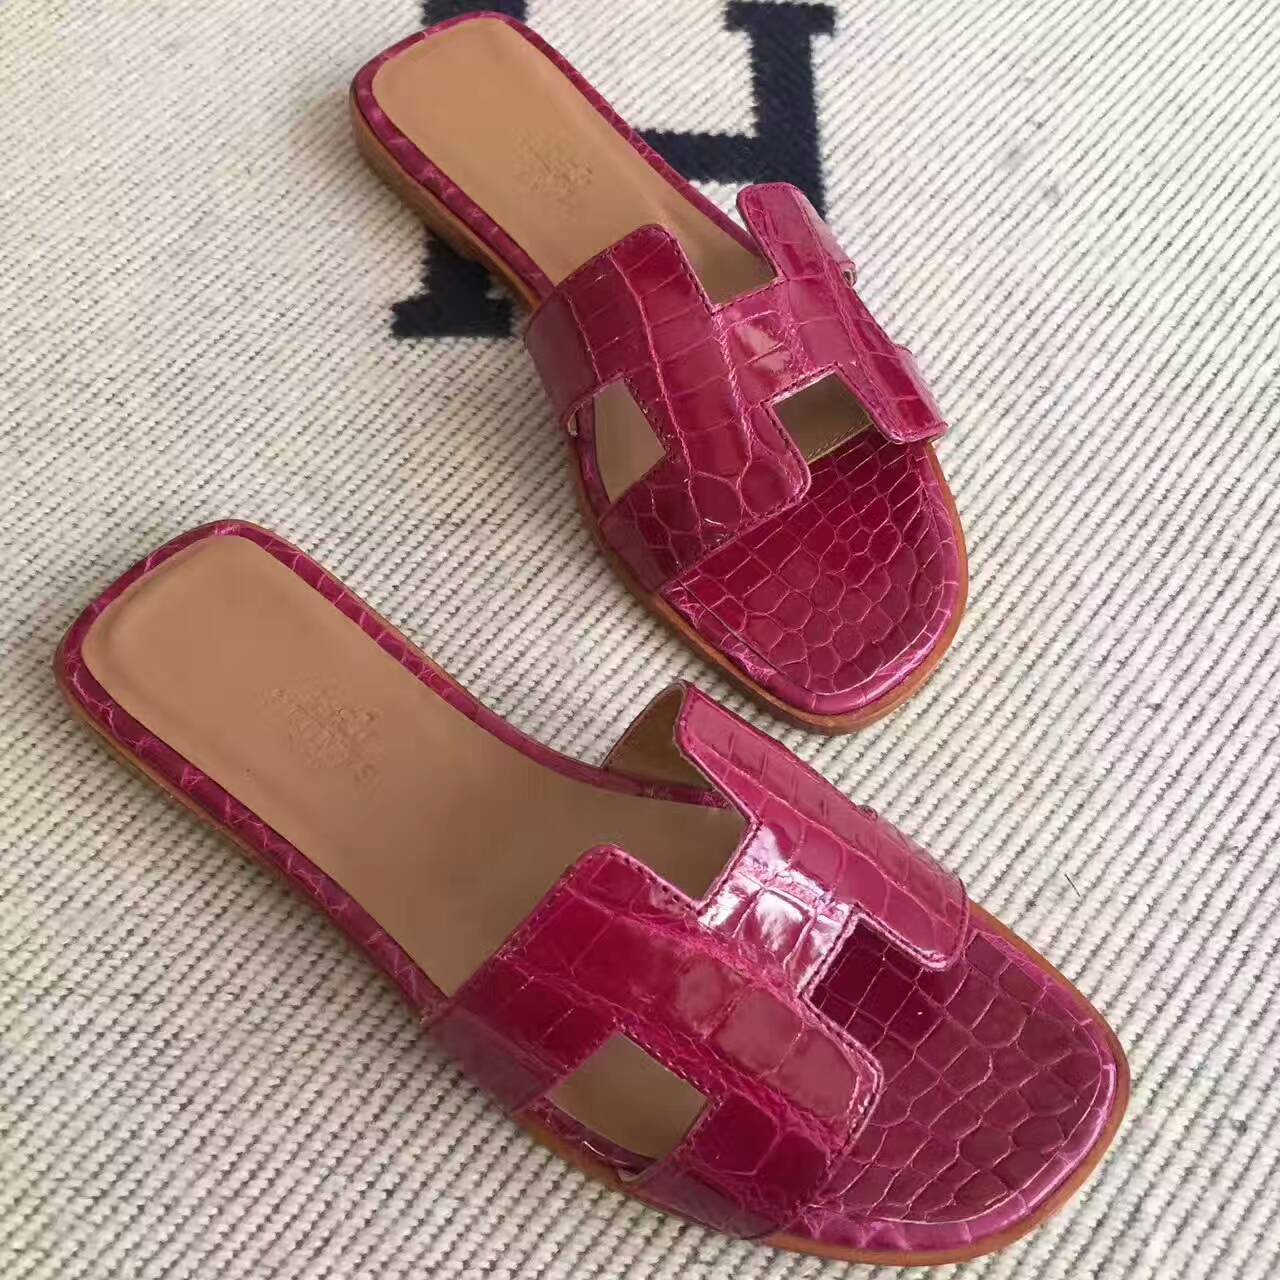 New Arrival Hermes Sandals Shoes in N5 Fuchsia Crocodile Leather Size35#